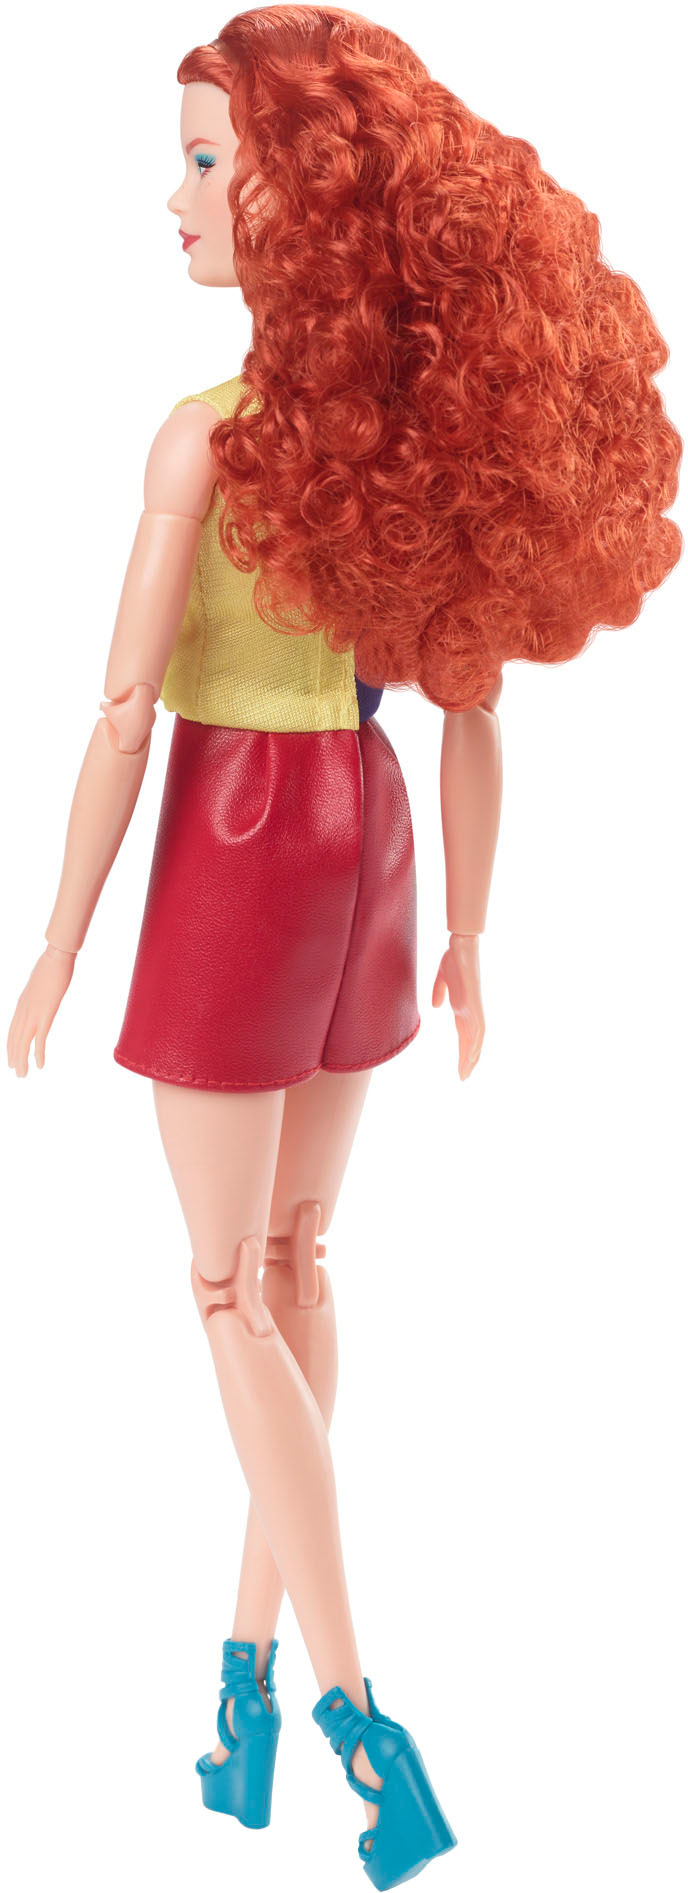 Angle View: Barbie - Looks Signature  Curly Red Hair 13" Doll